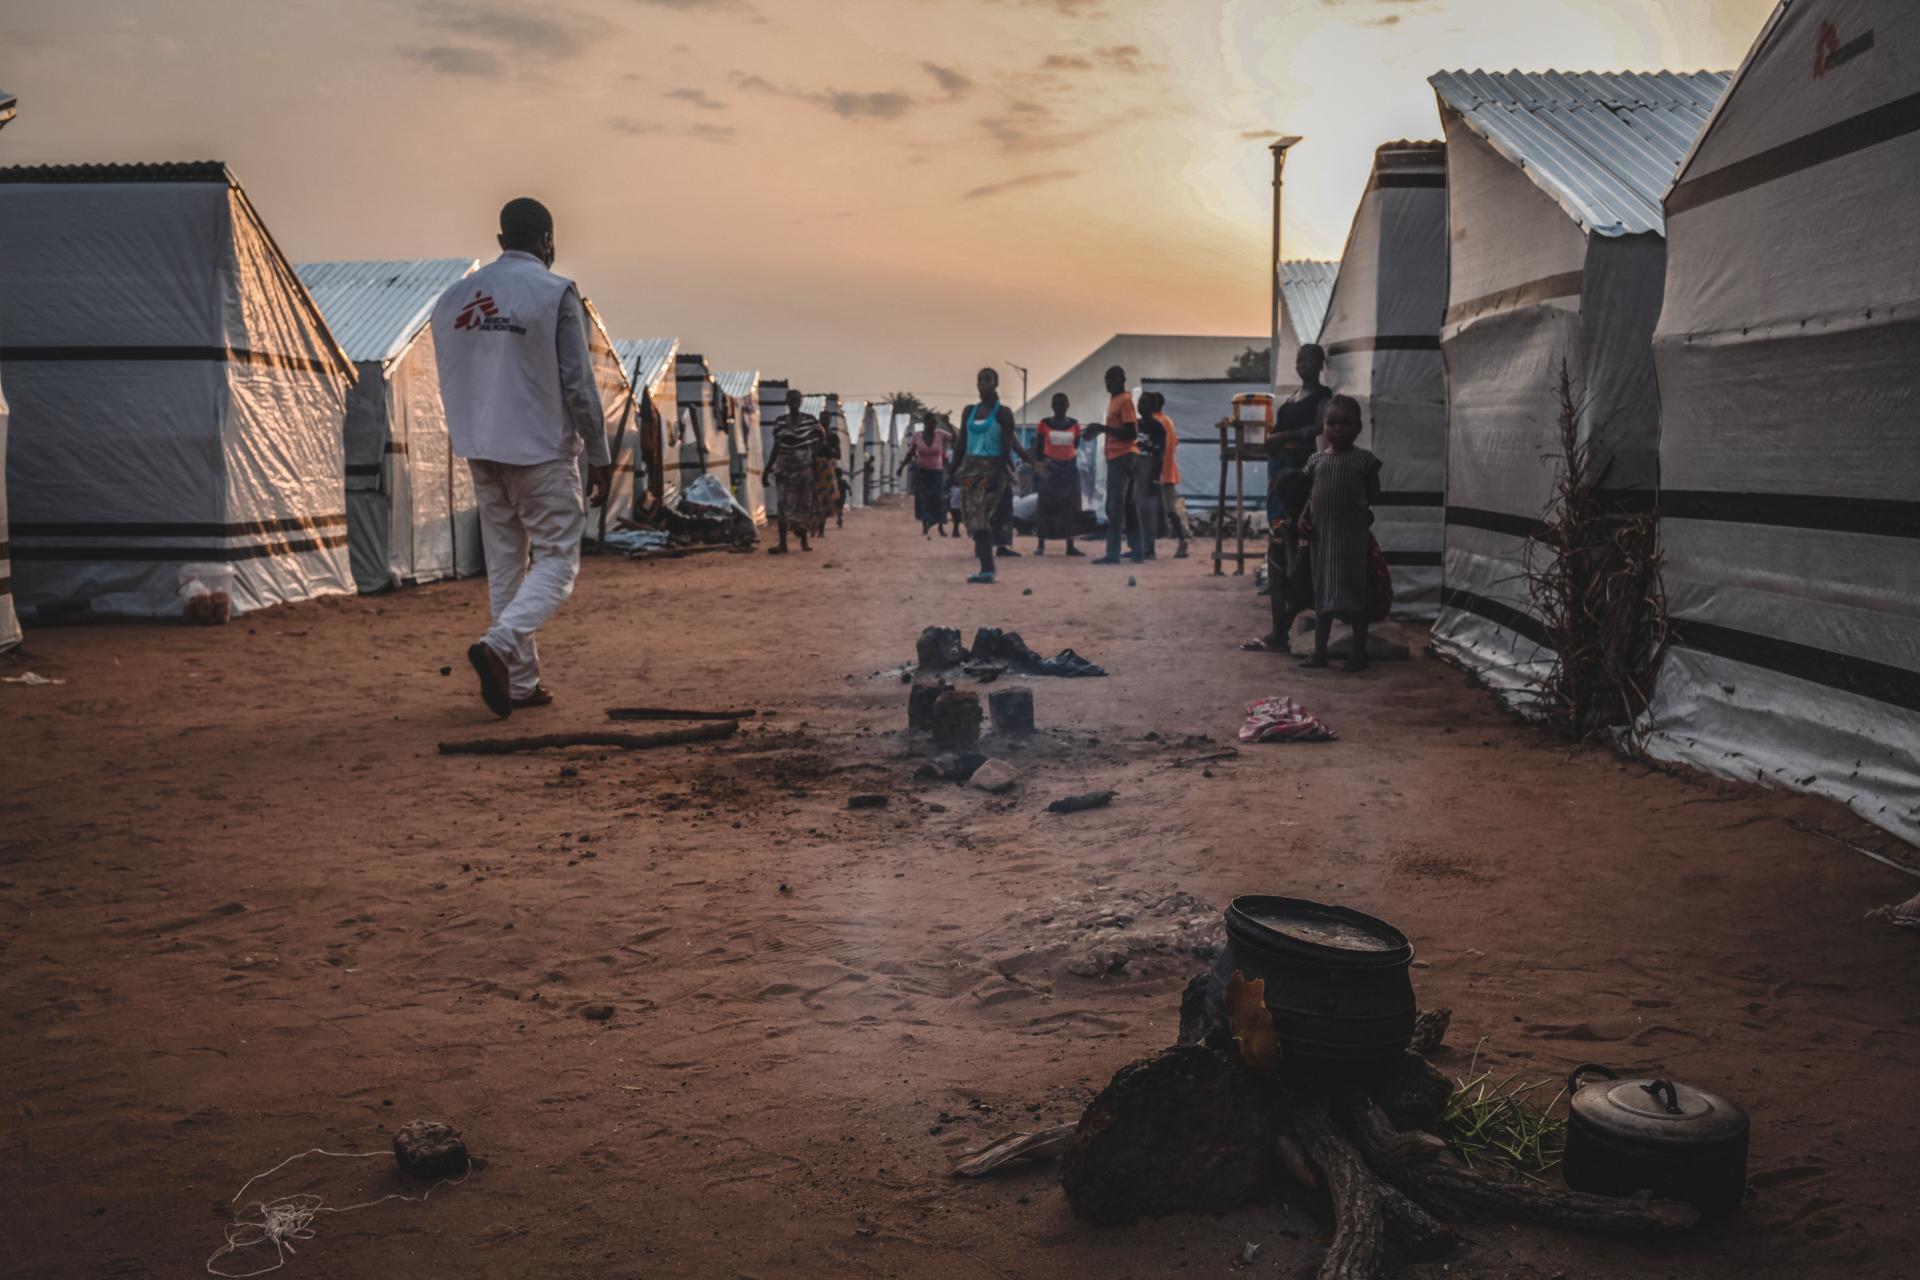 An MSF staff member walks through Mbawa internally displaced people's camp, where most of the displaced were uprooted by the so-called ‘farmer-herdsmen’ conflict. Benue state, Nigeria, June 2020.